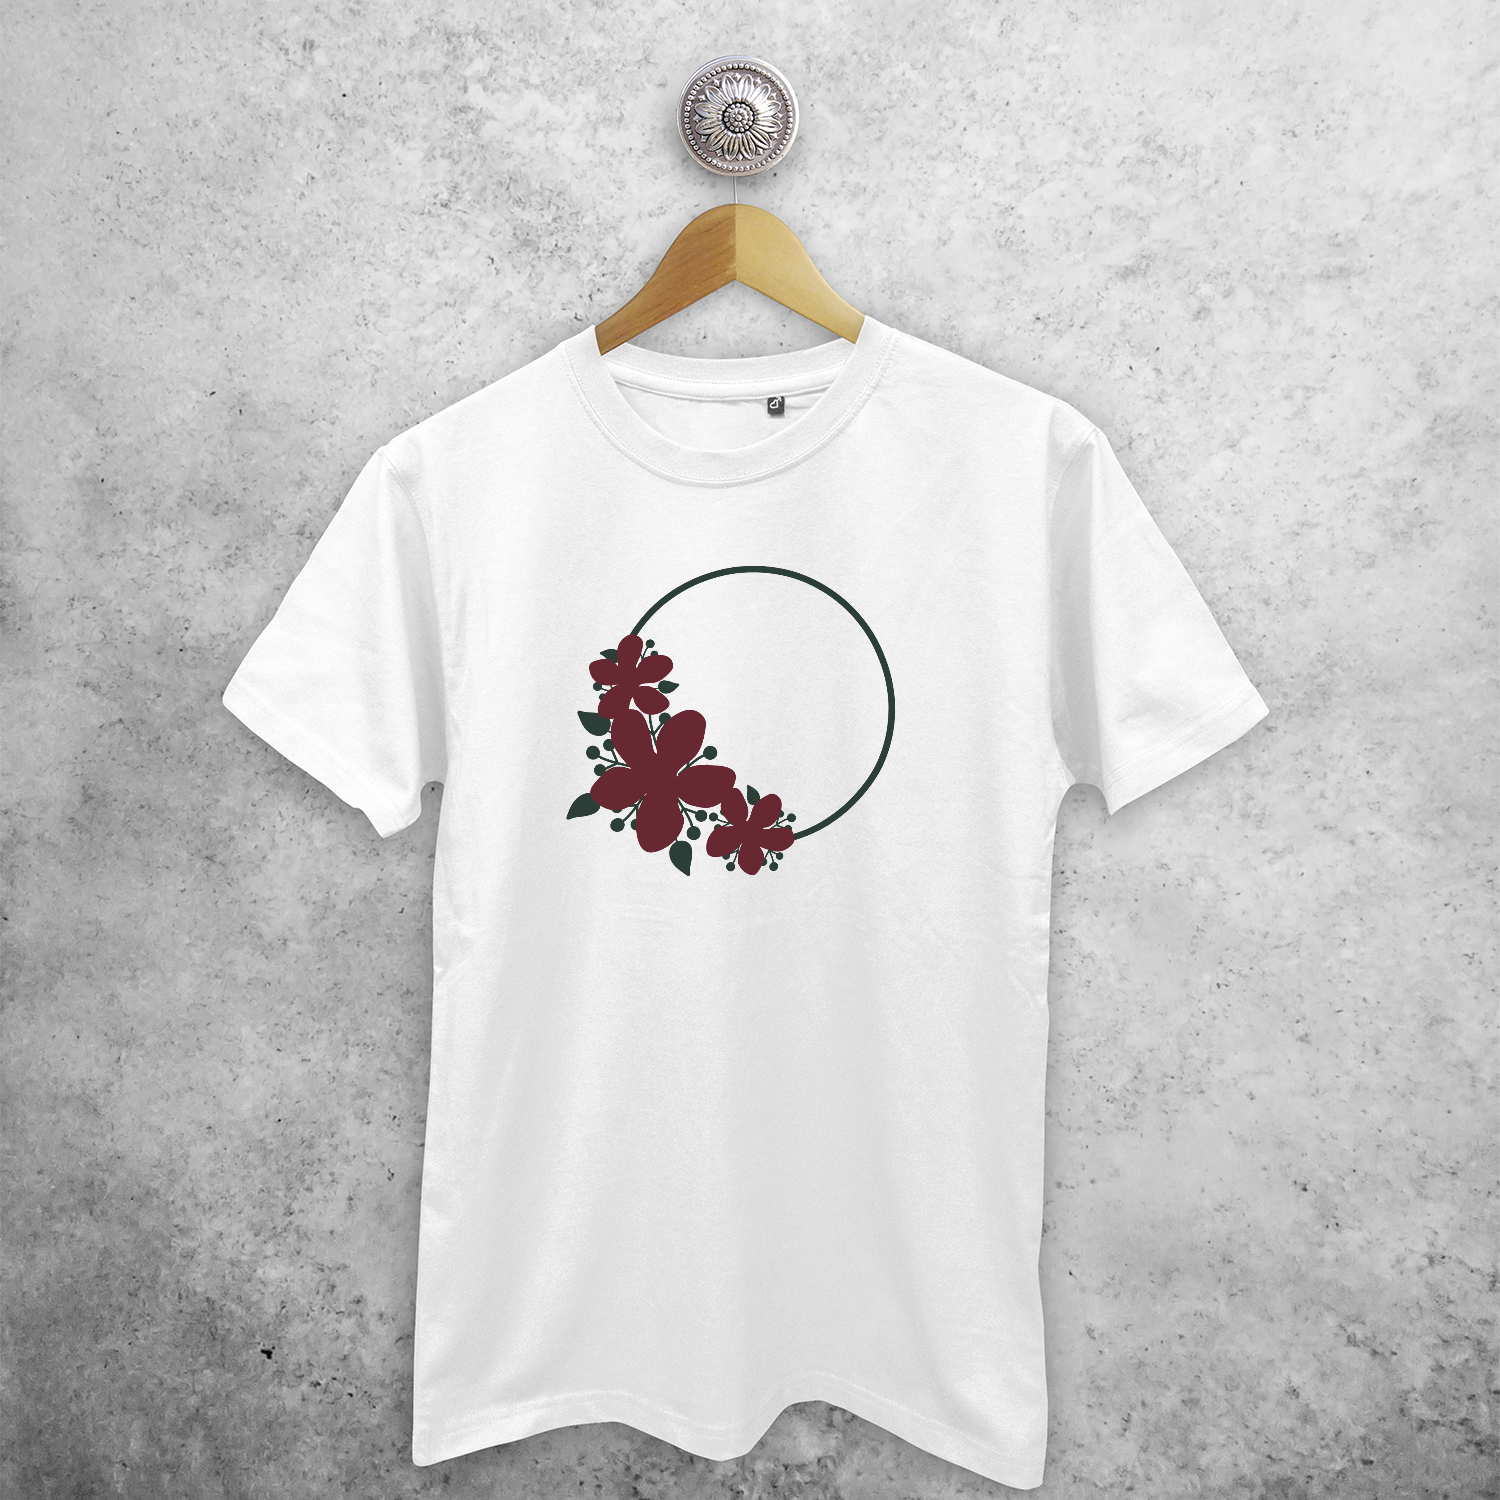 Circle and flowers adult shirt